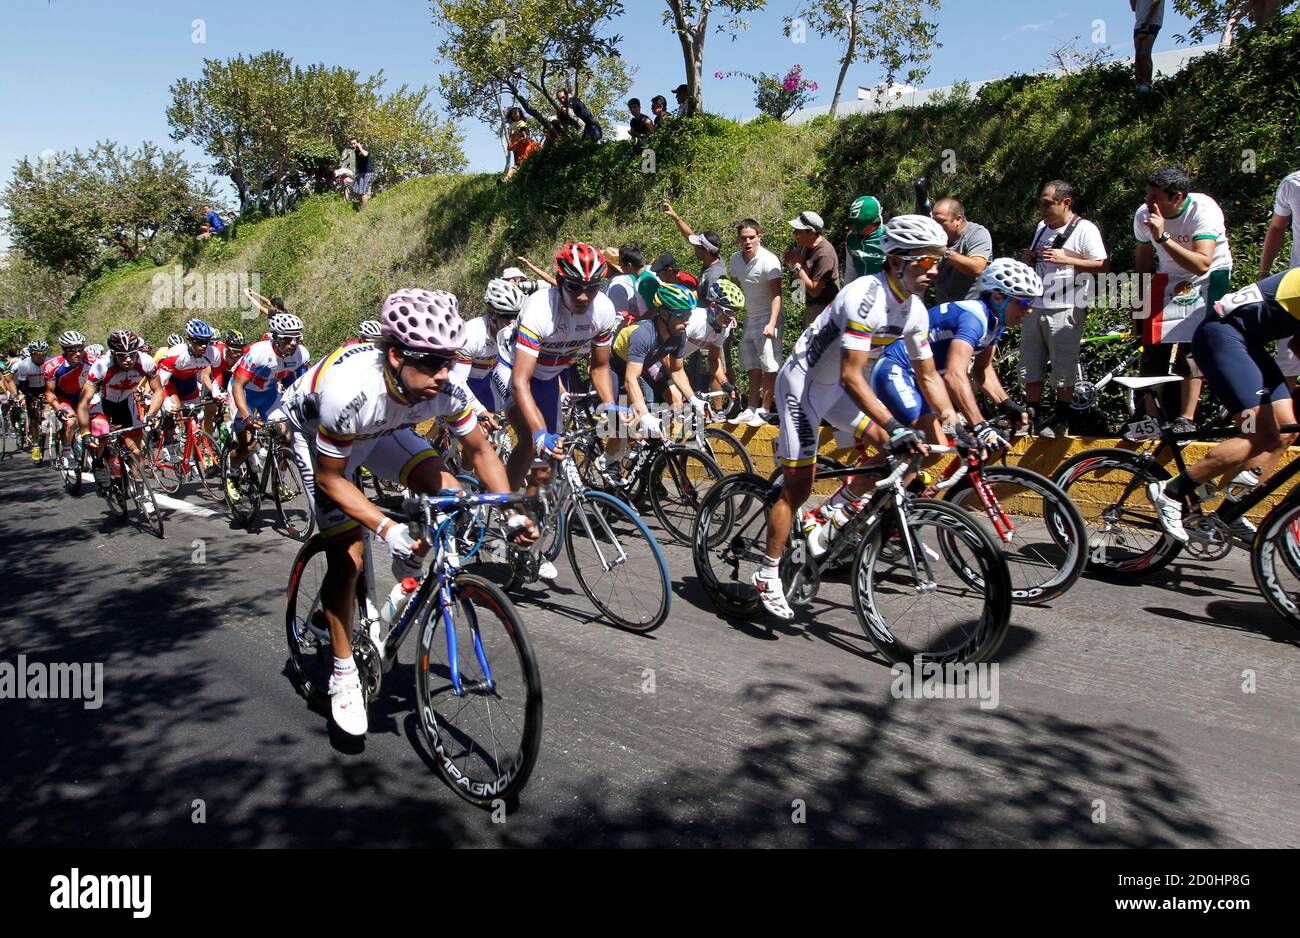 Cyclists compete in the men's road race cycling competition at the Pan American Games in Guadalajara, October 22, 2011.   REUTERS/Jose Miguel Gomez    (MEXICO - Tags: SPORT CYCLING) Stock Photo